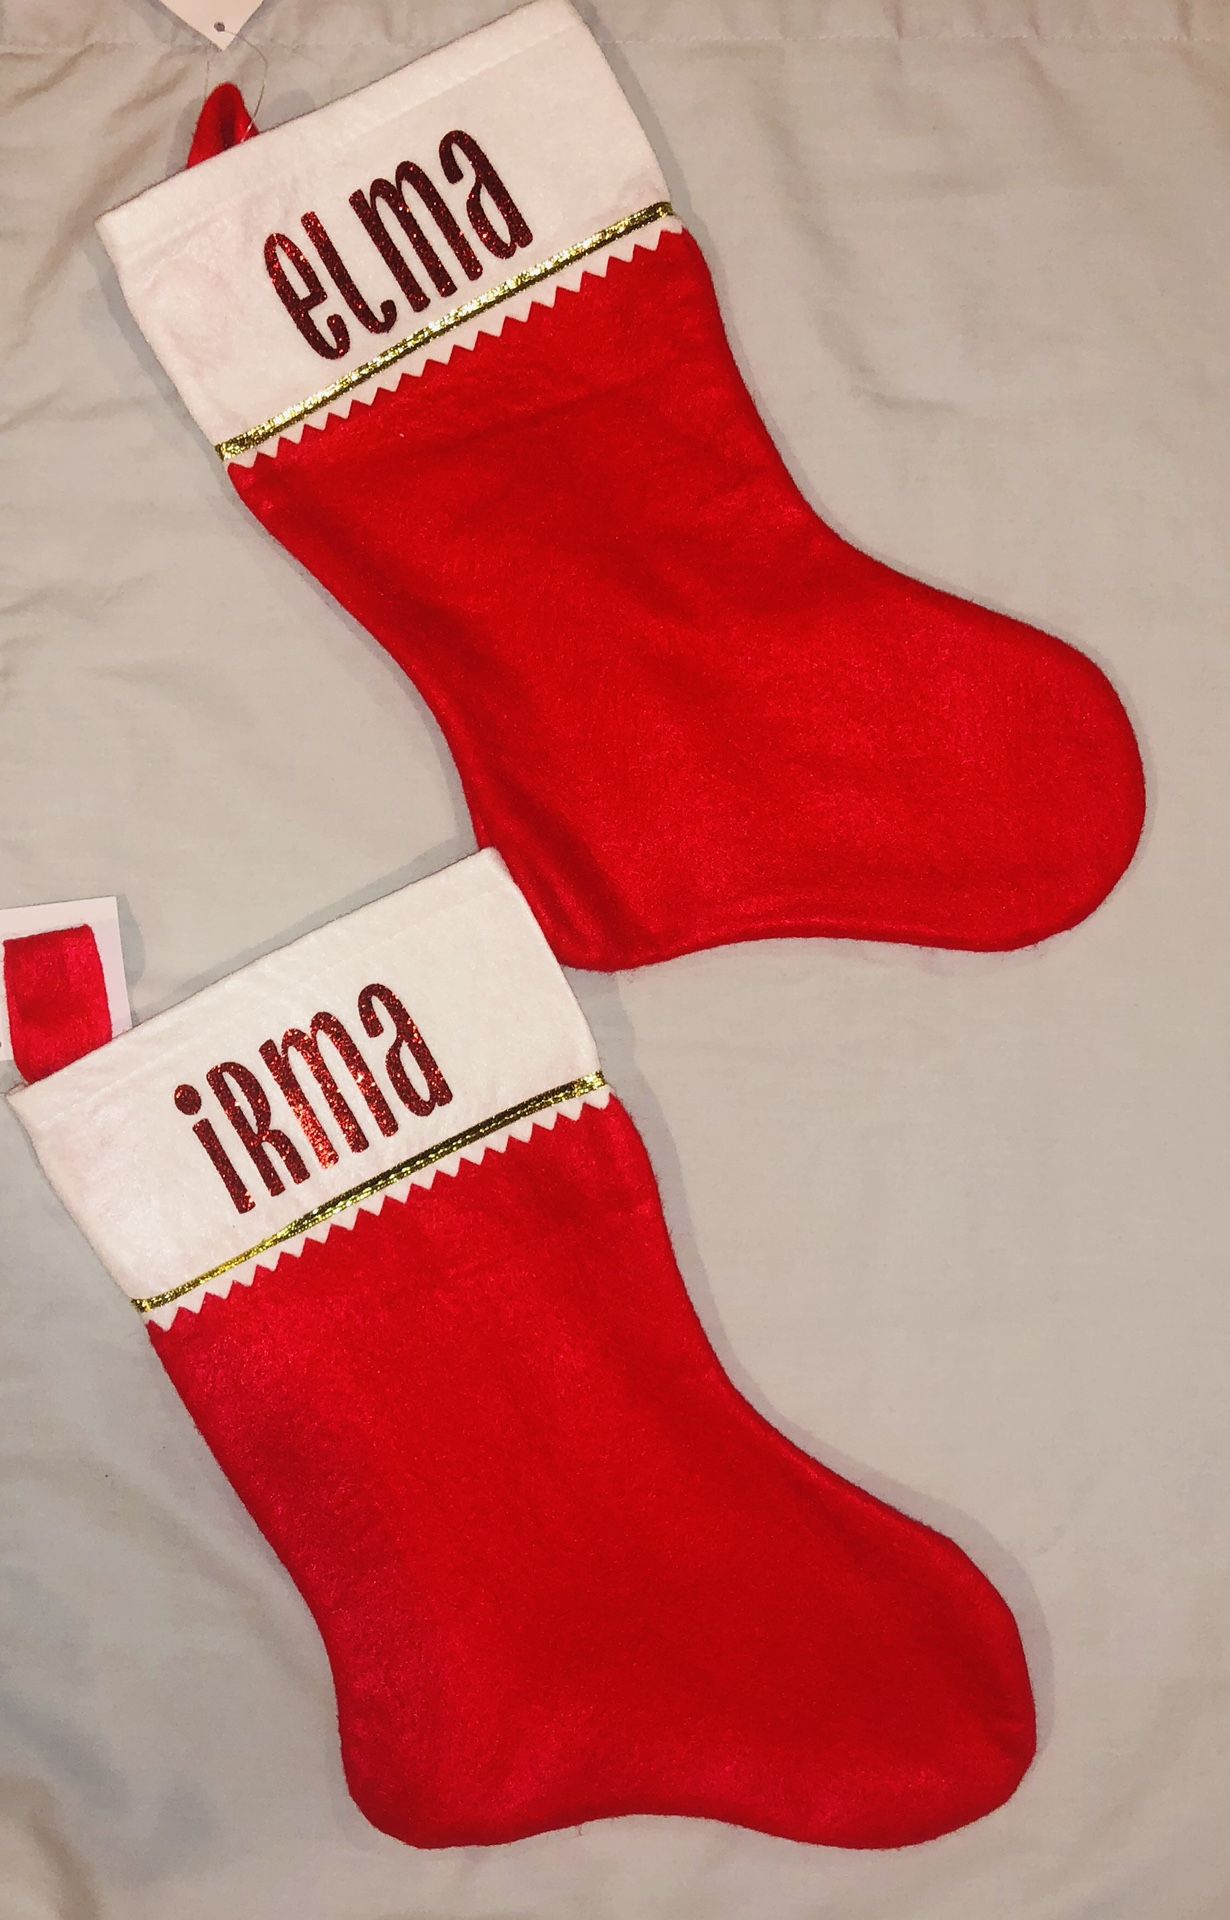 Personalized stockings Christmas